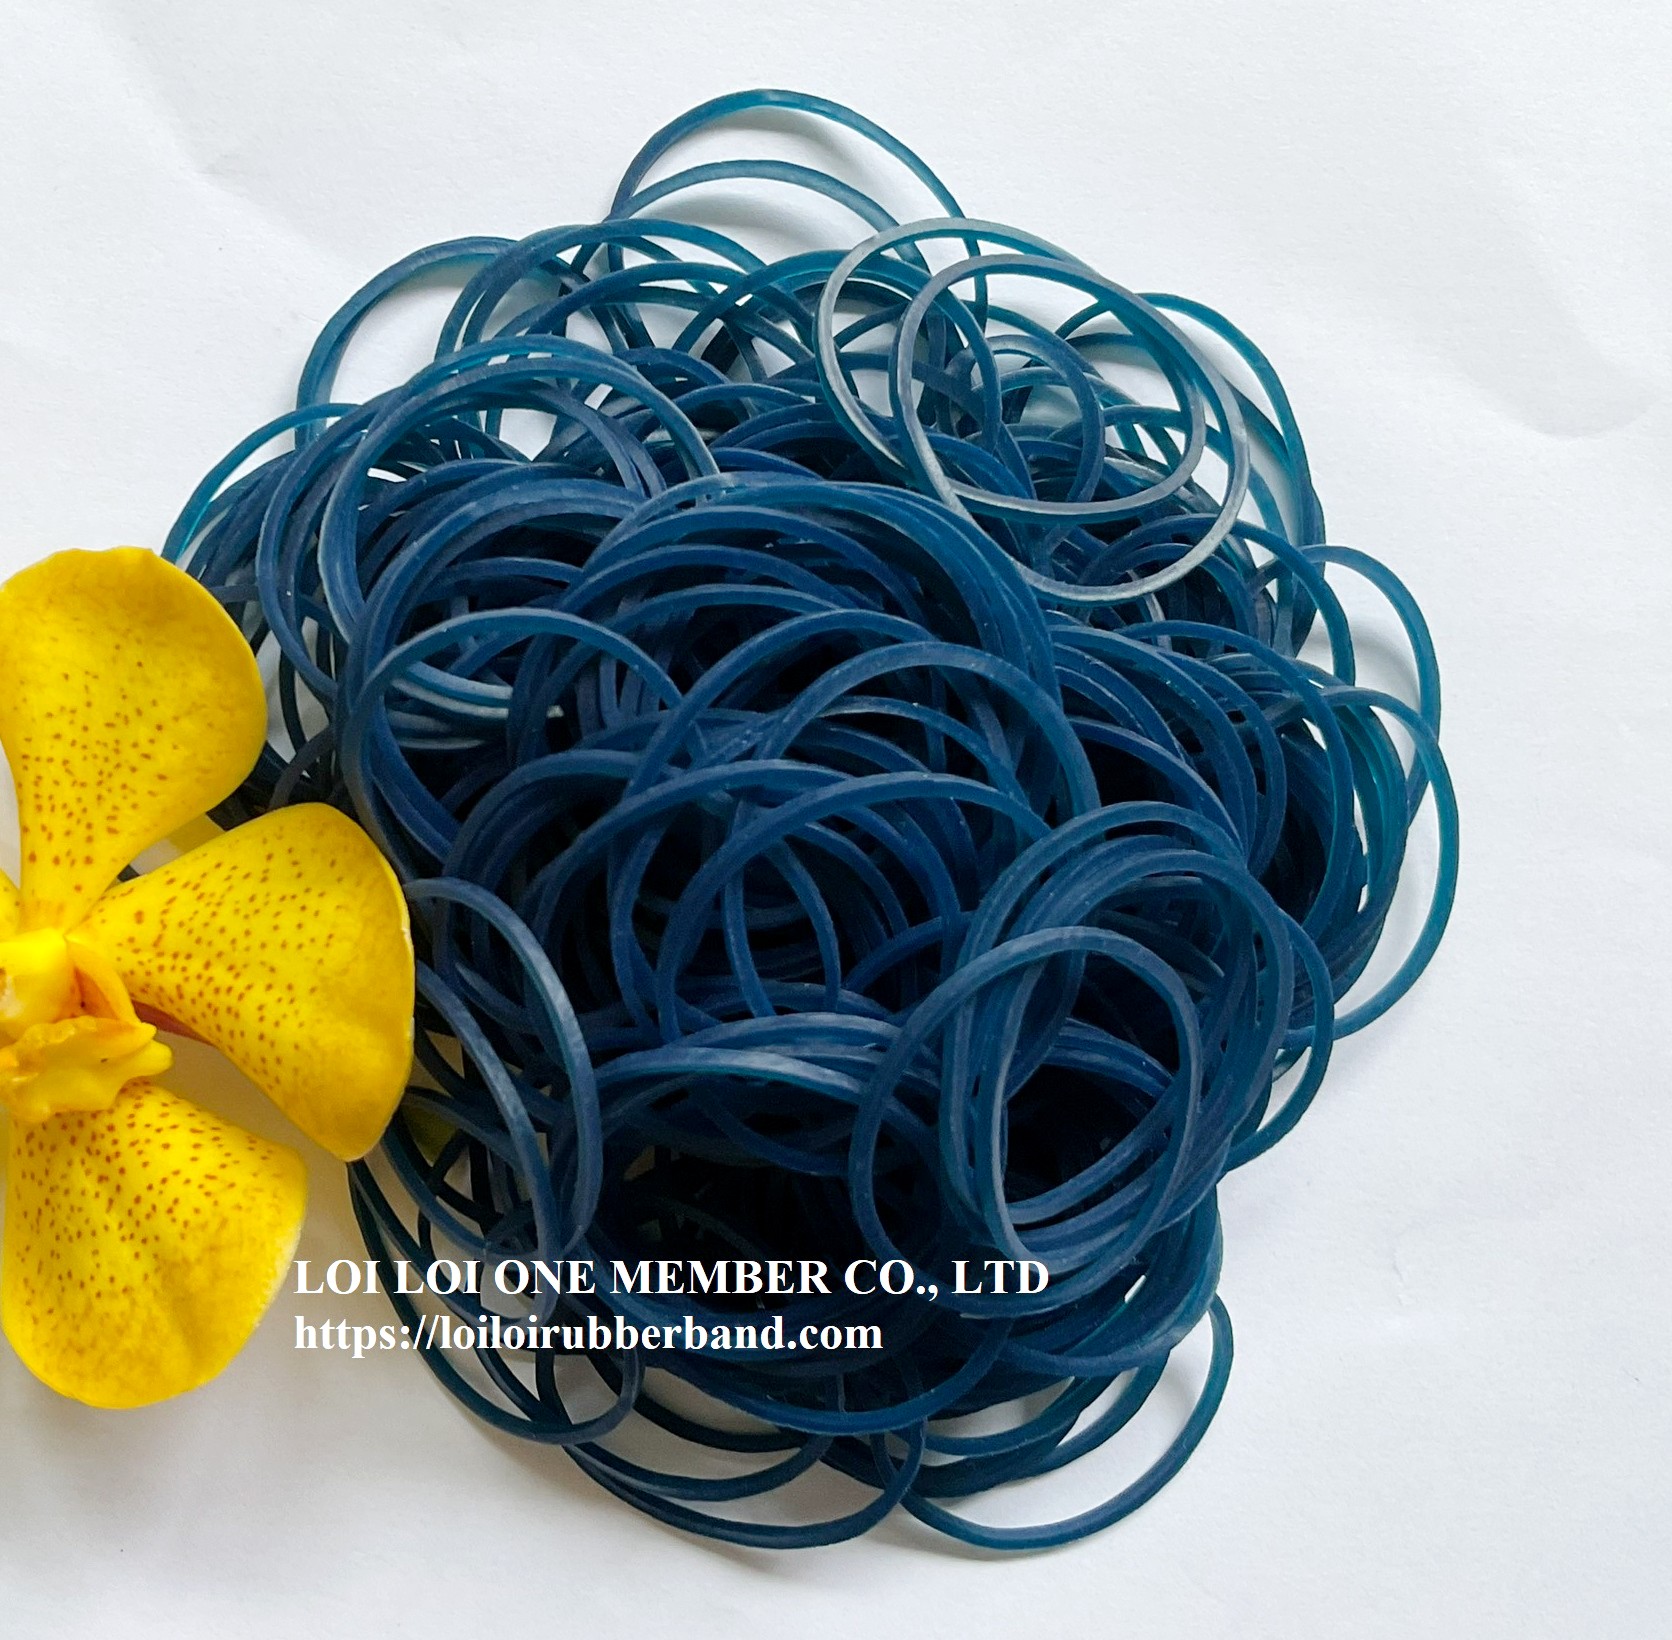 VIETNAM Manufacturer Durable Rubber Band Navy Blue color best Design wholesale cheap price to all customers for stationery 